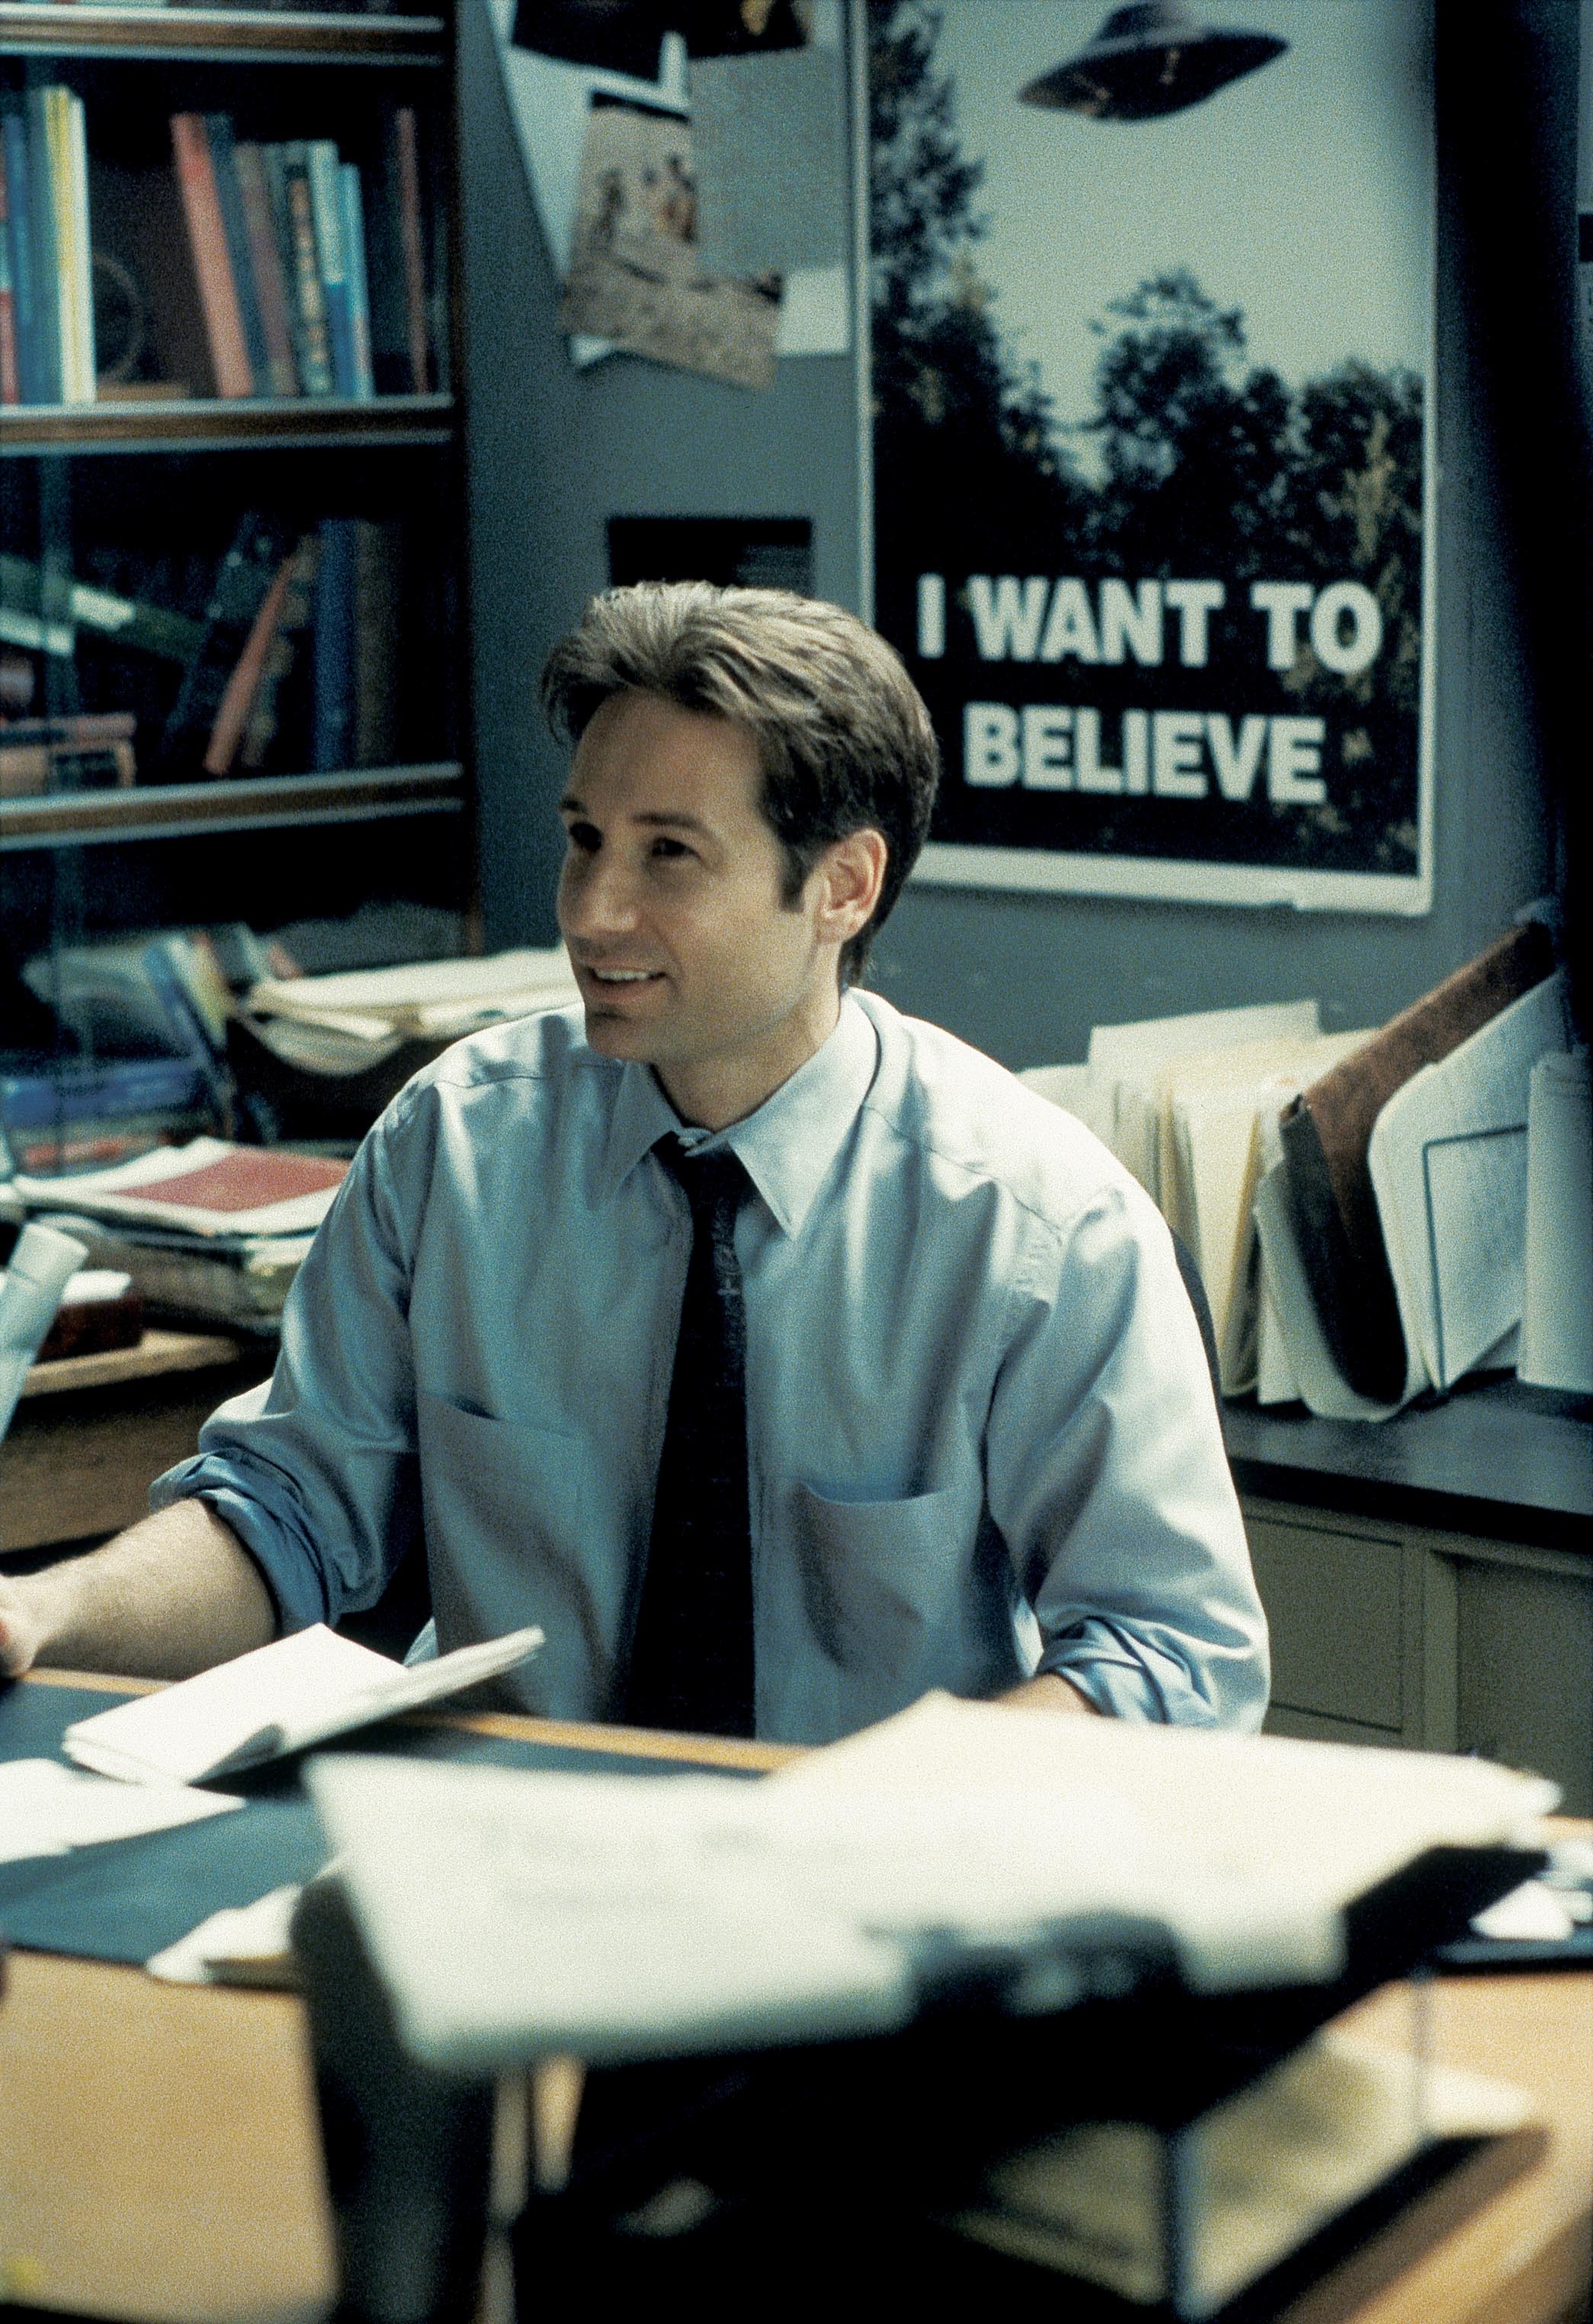 David Duchovny as Agent Fox Mulder early in The X-Files